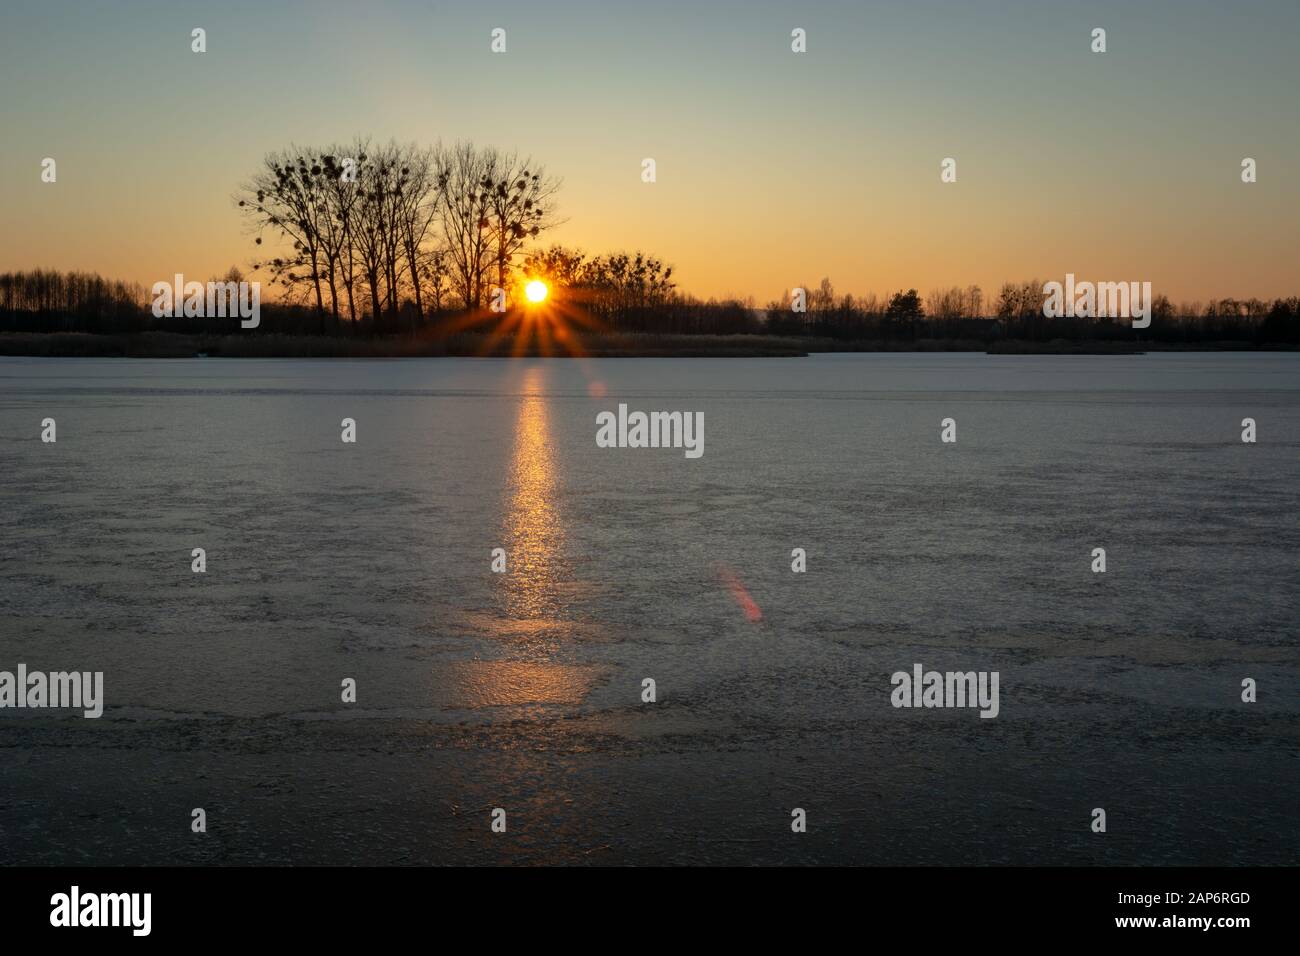 A frozen lake, trees on the horizon and the glow of the setting sun Stock Photo